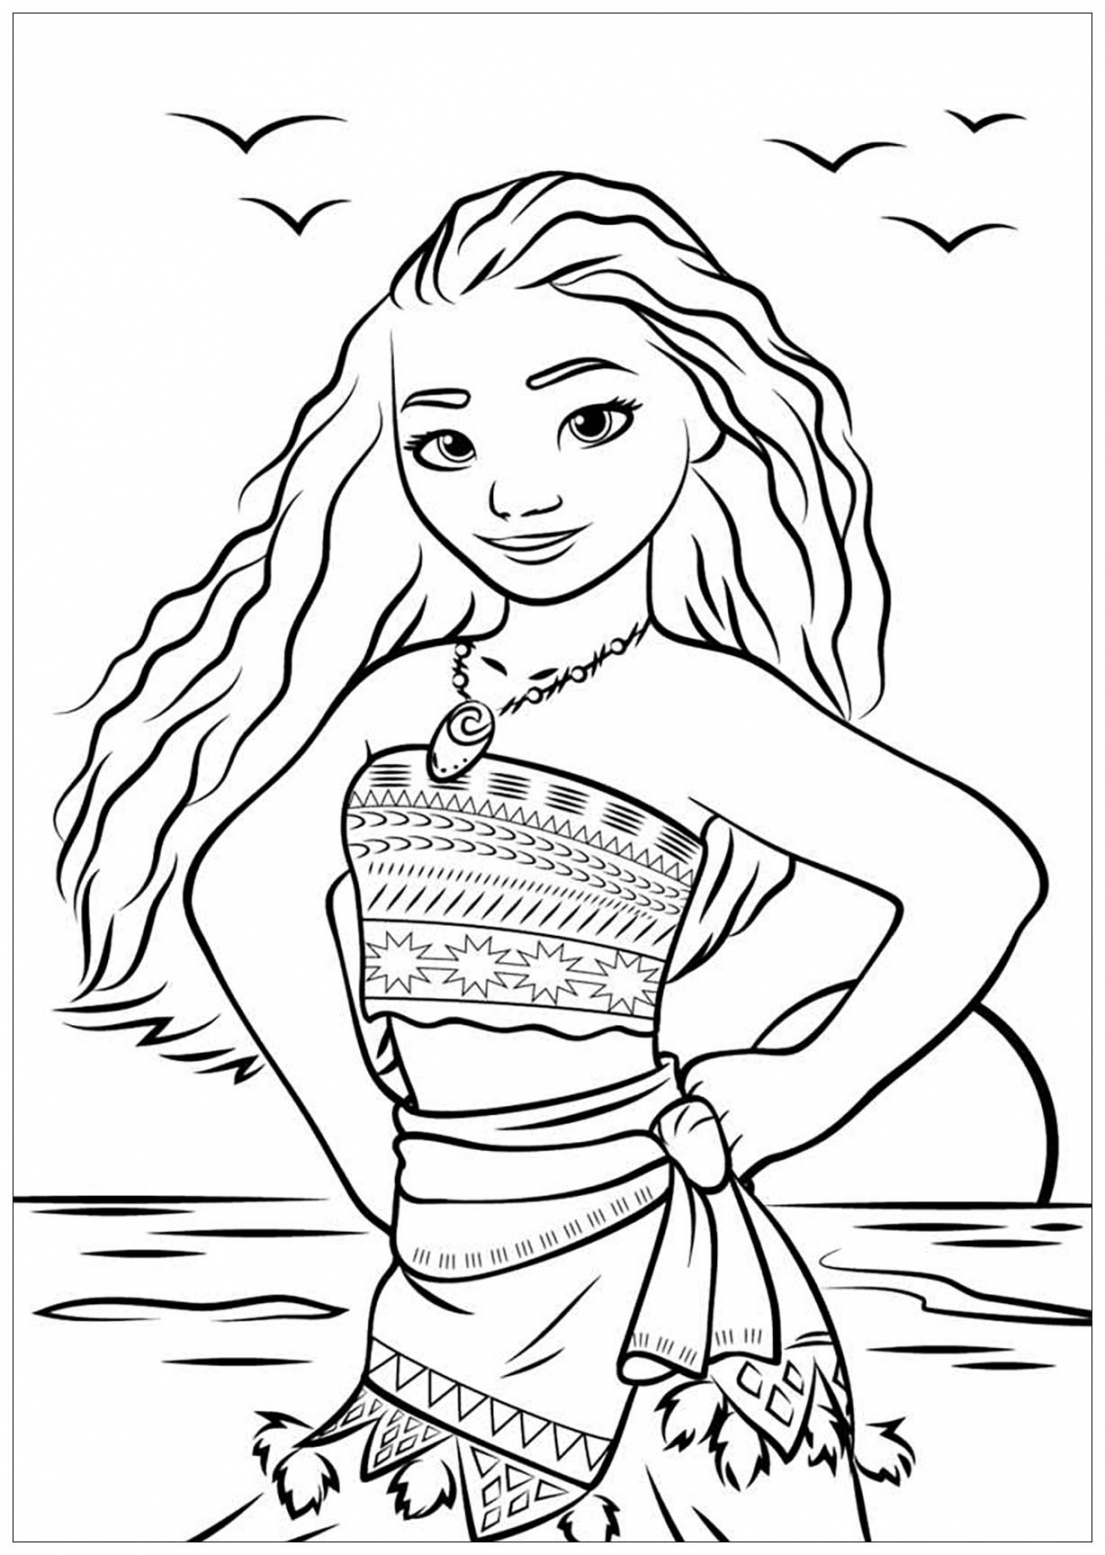 Free Vaiana drawing to print and color - Moana Kids Coloring Pages - FREE Printables - Free Printable Moana Coloring Pages